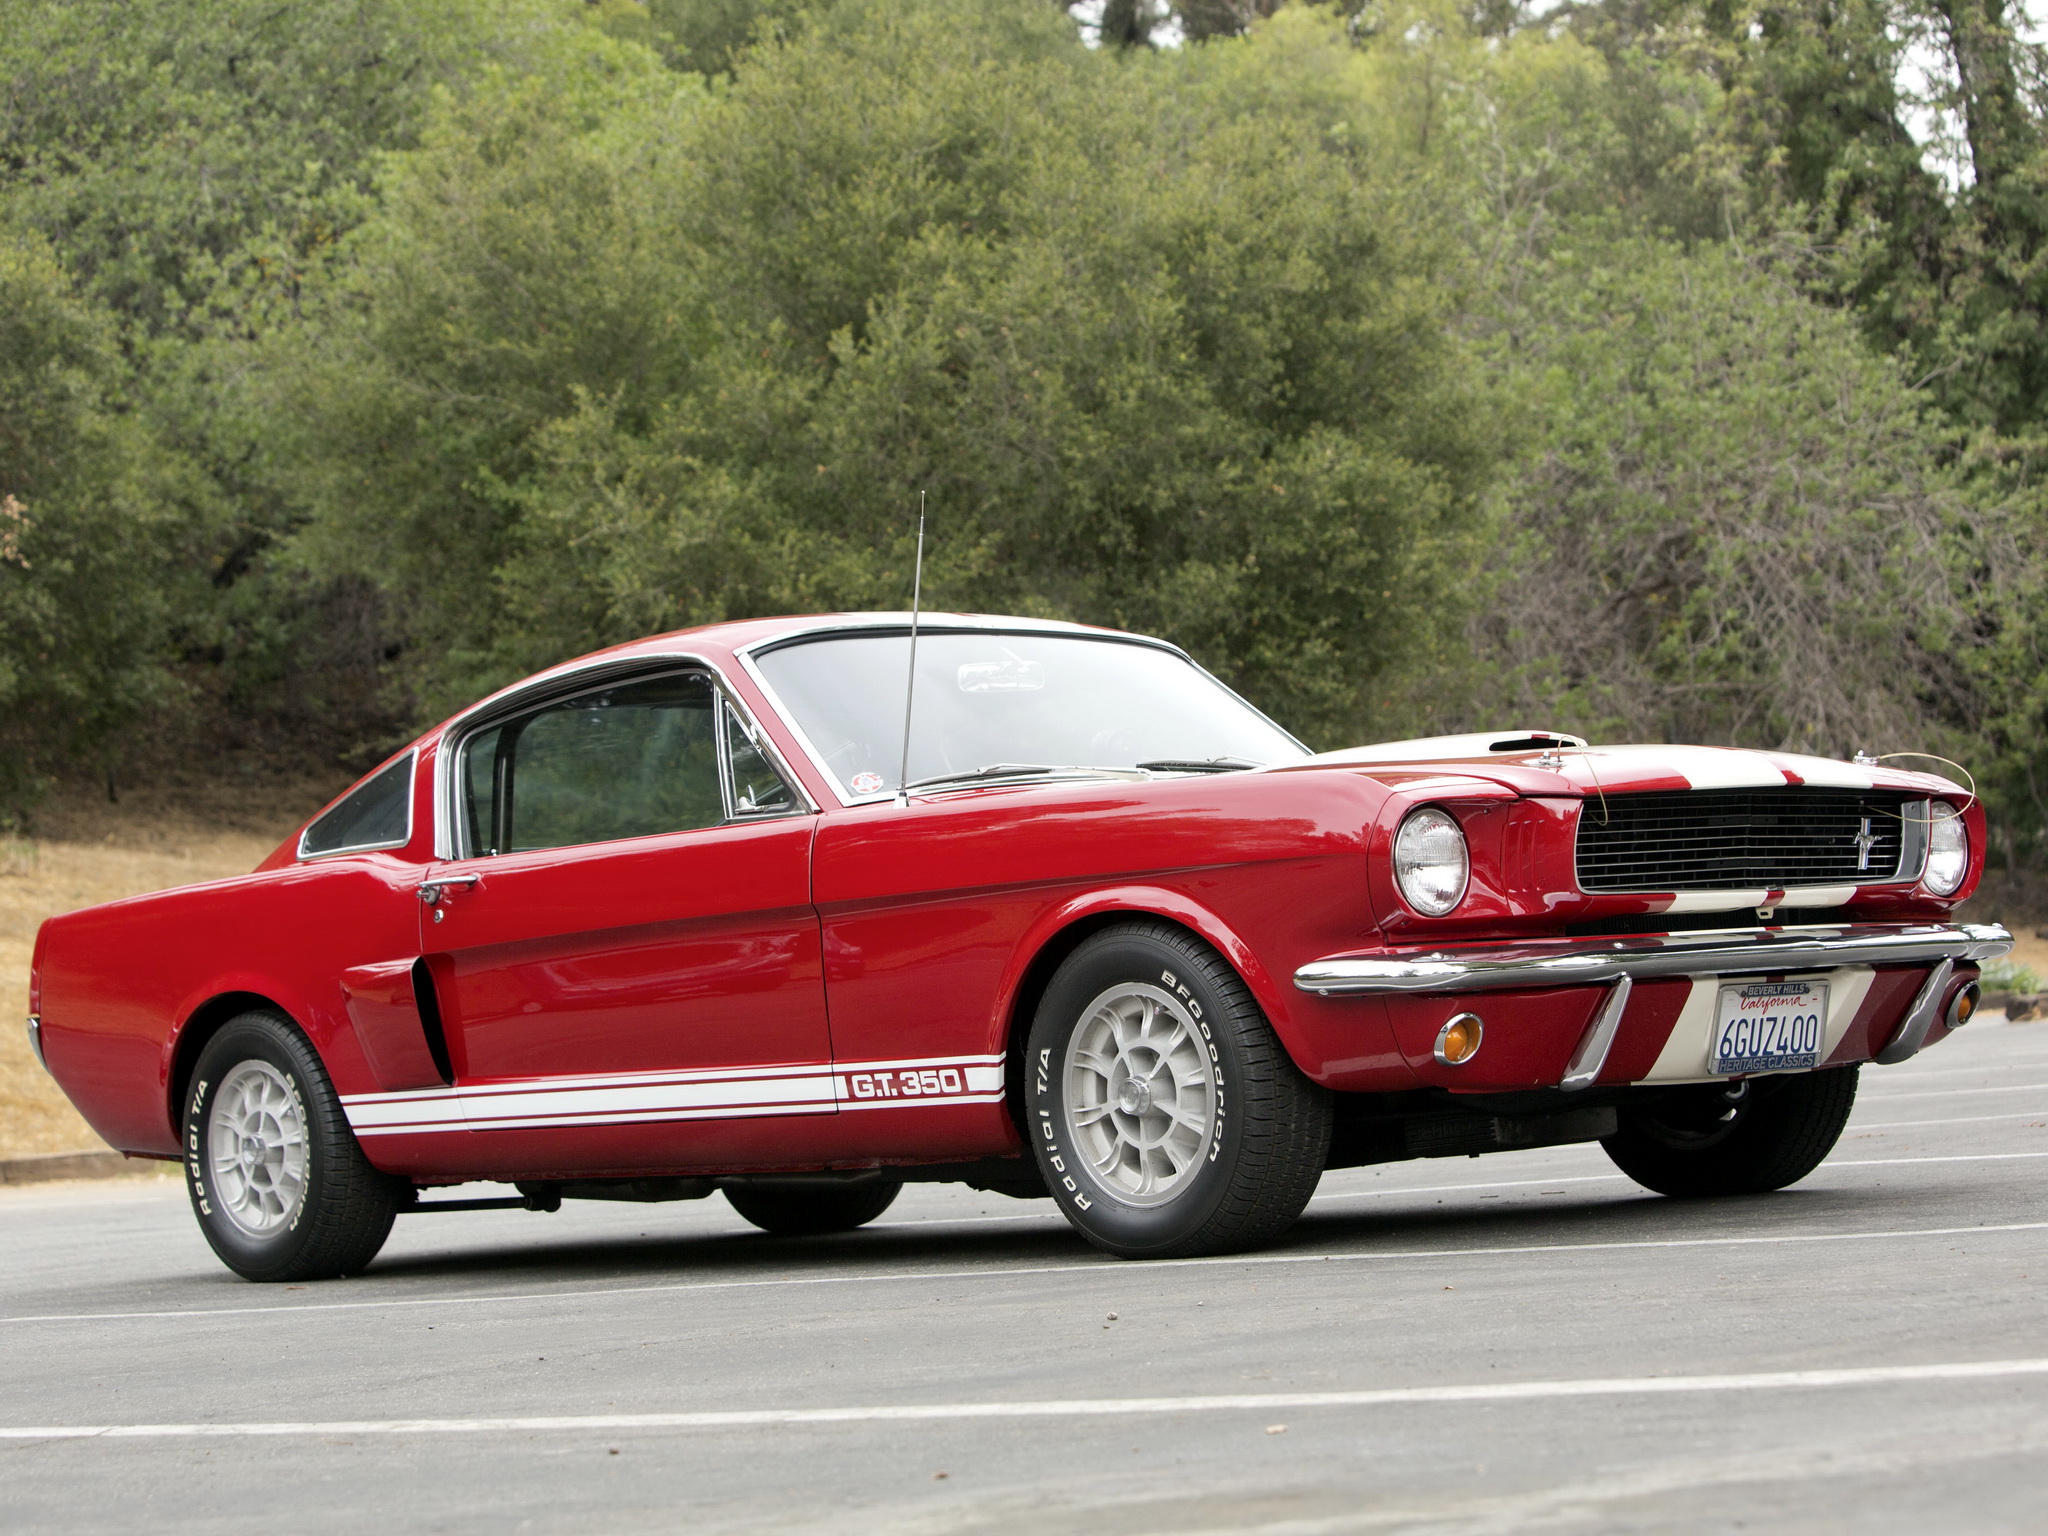 Shelby Gt350 Ford Mustang Classic Muscle Hf Wallpaper